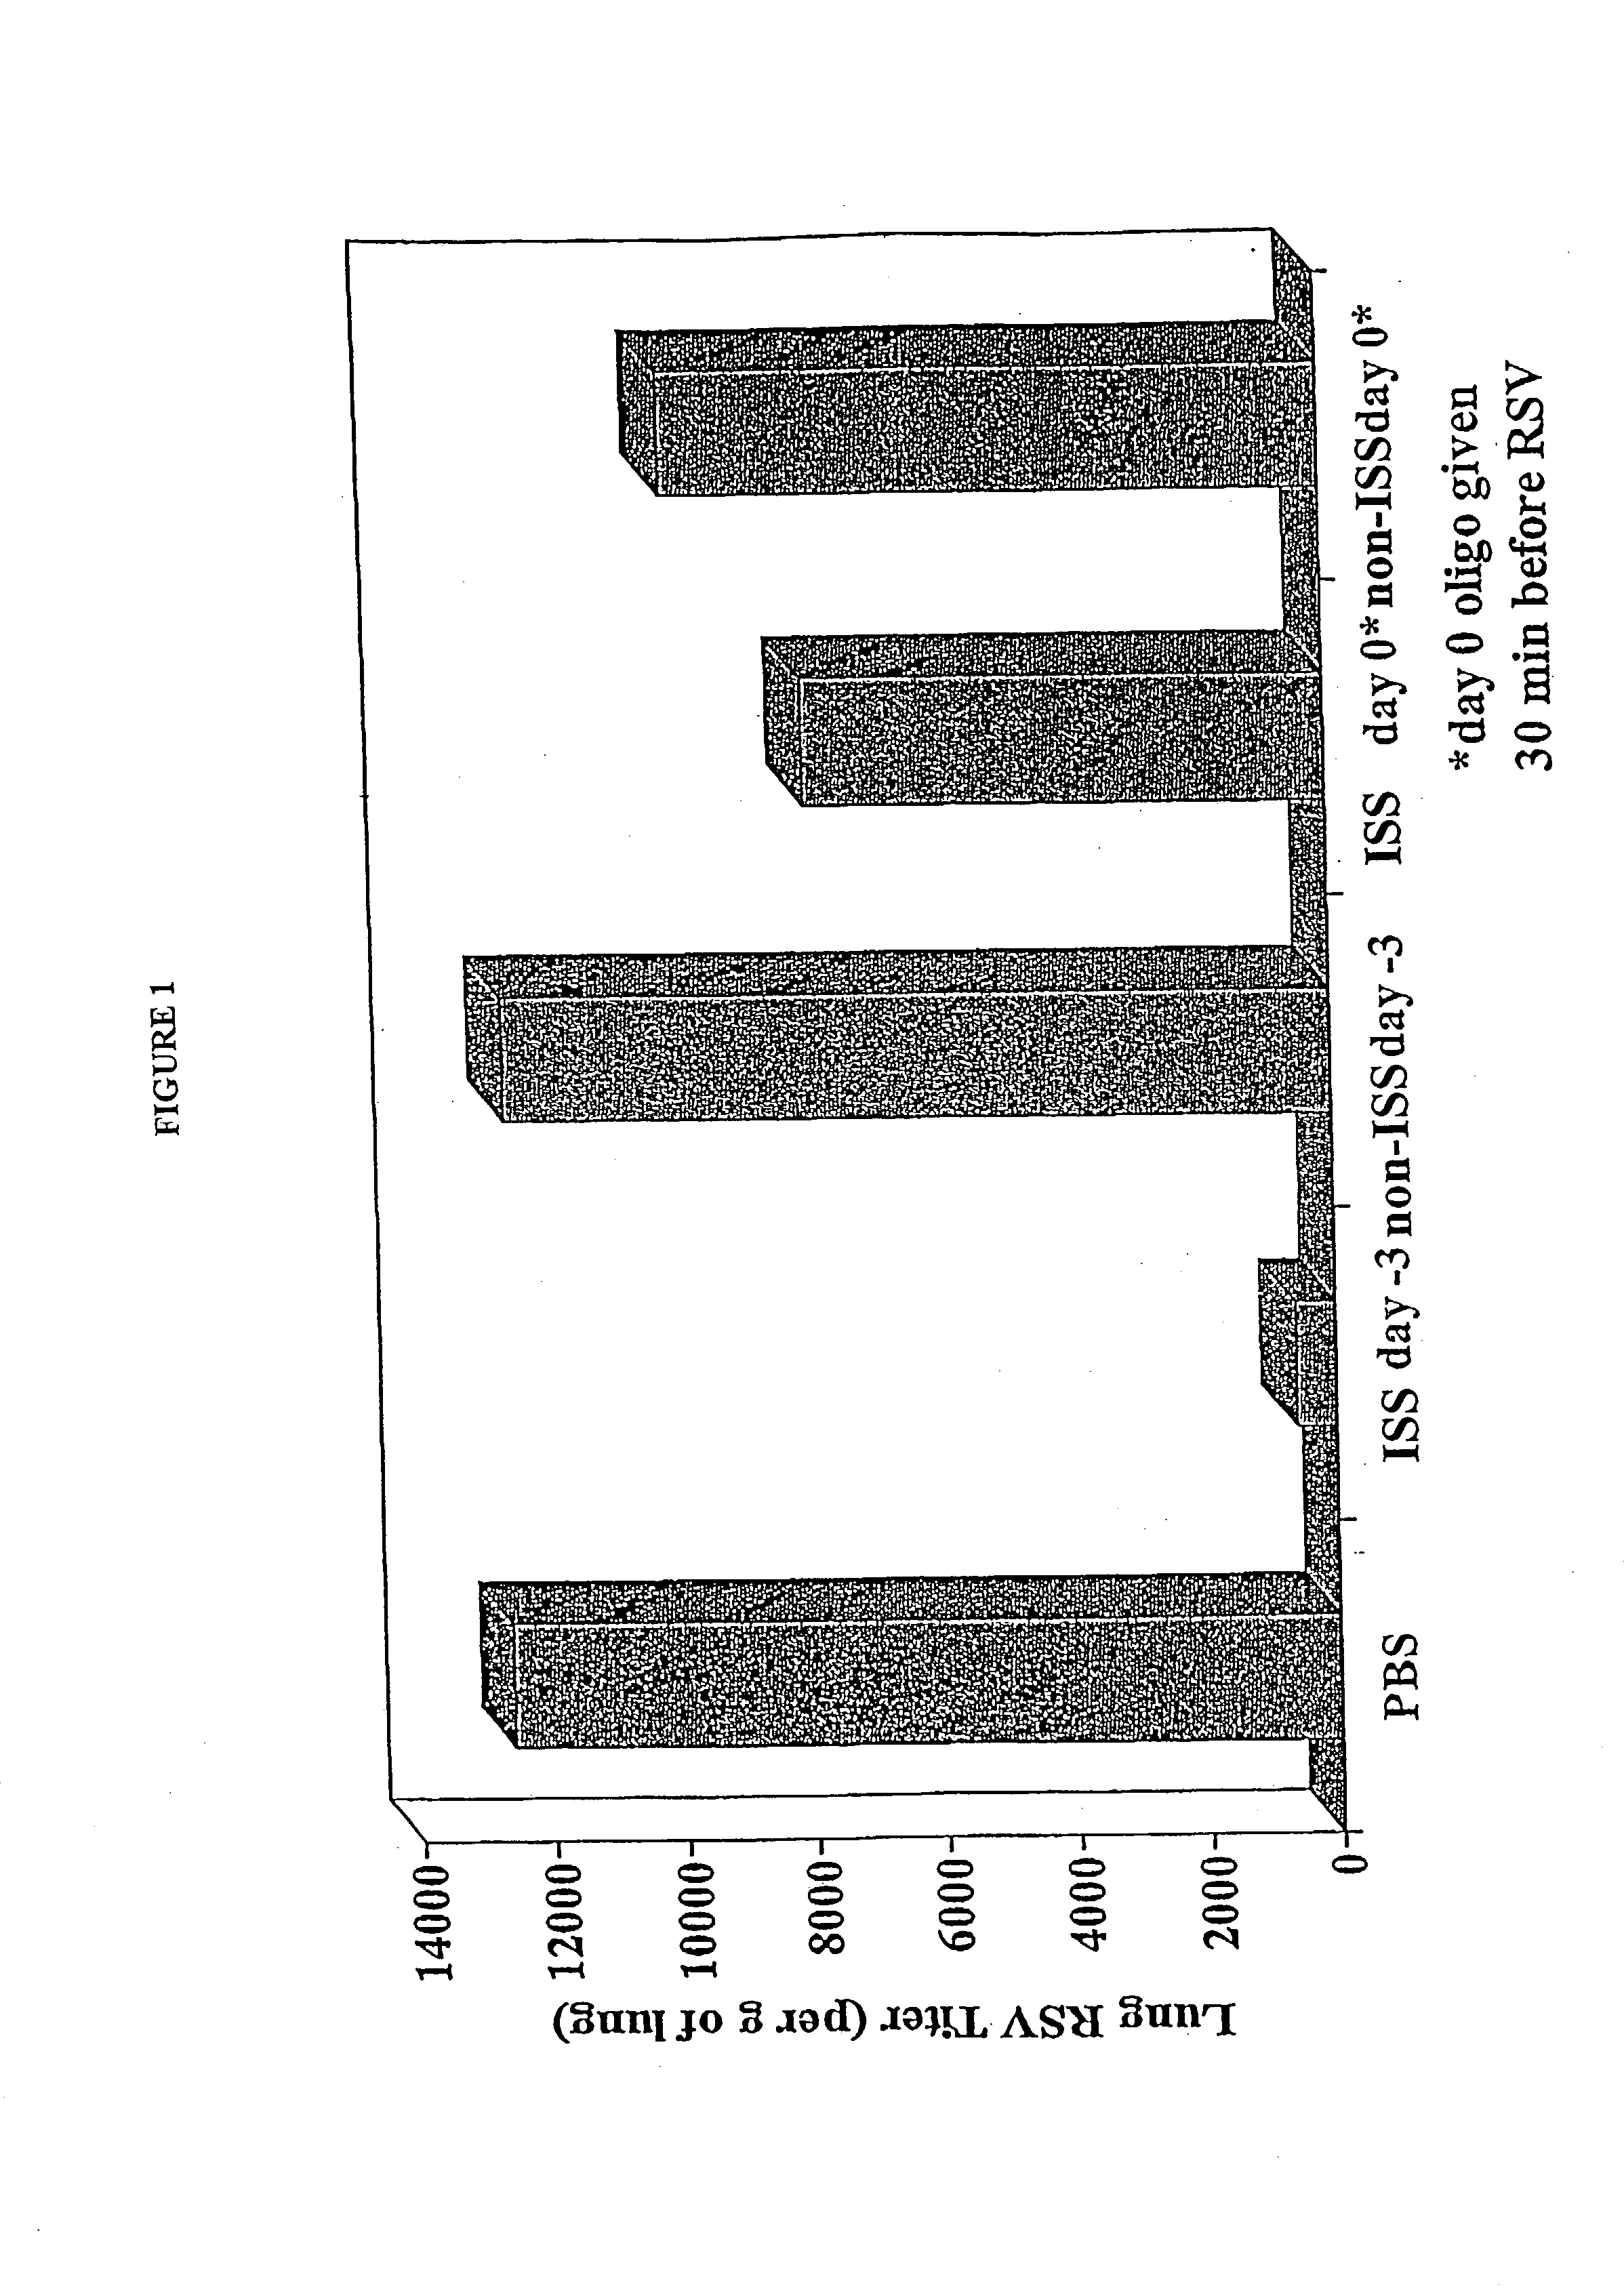 Methods of preventing and treating respiratory viral infection using immunomodulatory polynucleotide sequences